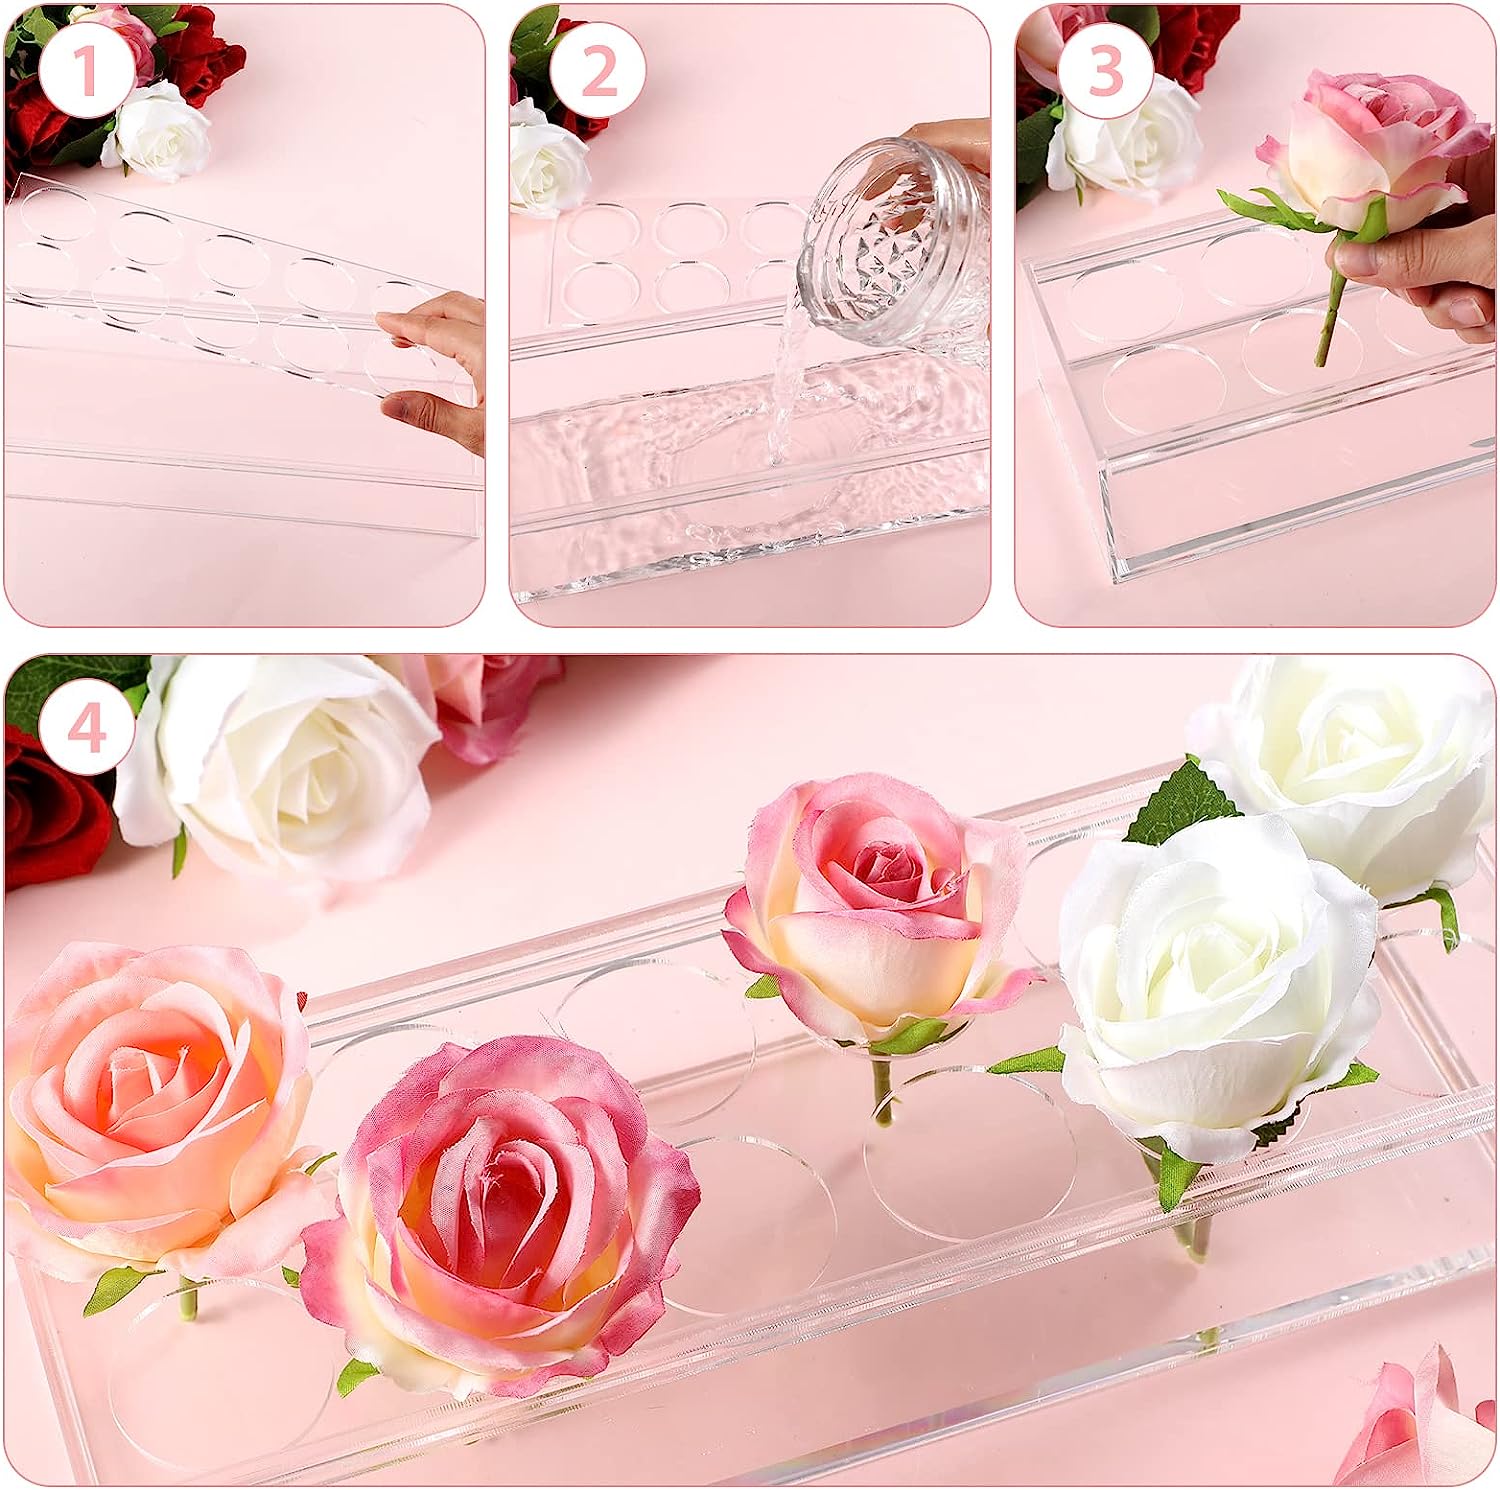 💓Mother's Day Gift🔥50% OFF🔥The Limited Offer - Clear Acrylic Flower Vase